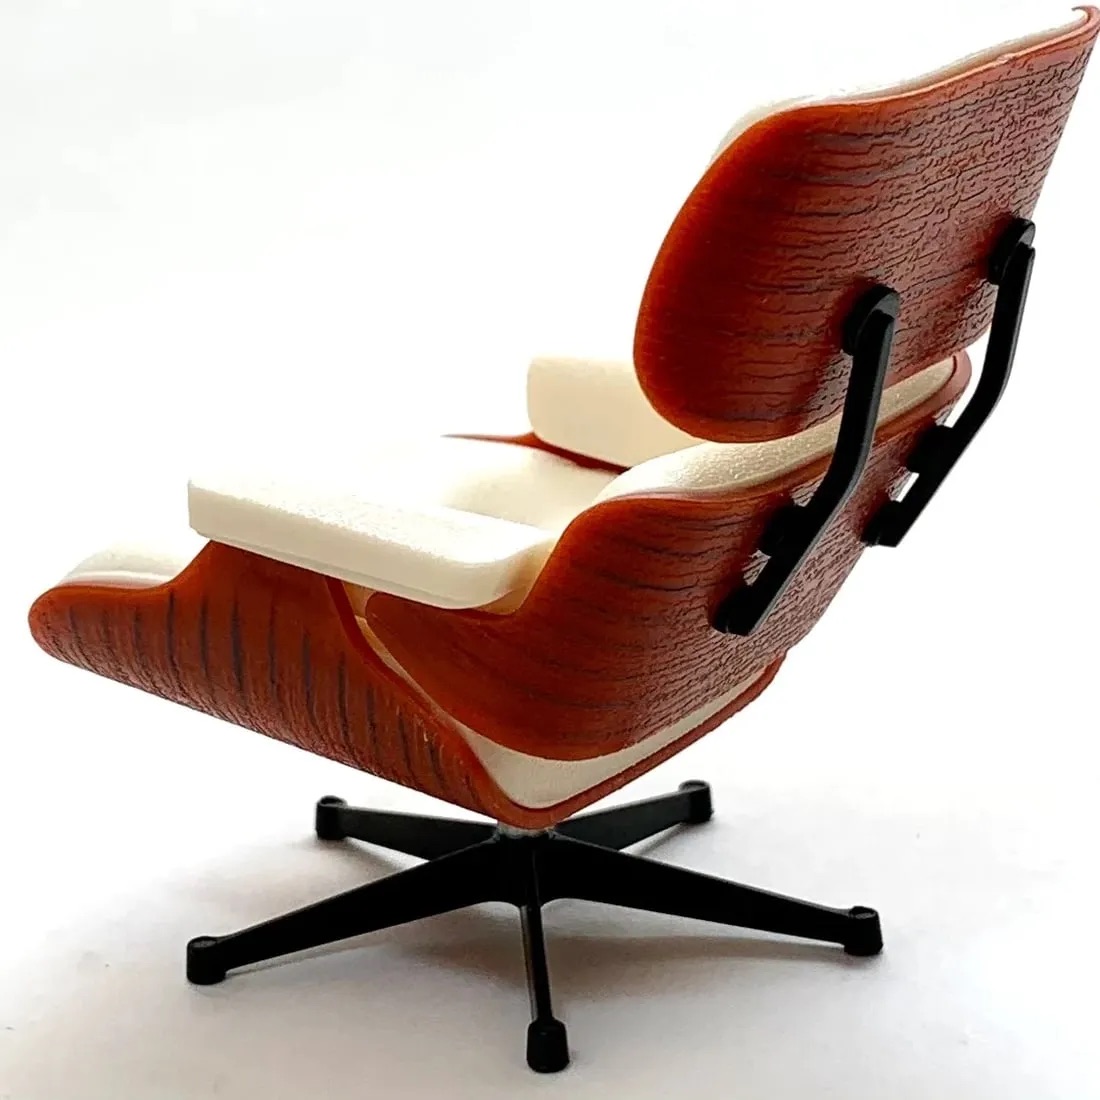 Eames White Lounge Chair Desk Display - Image 4 of 4